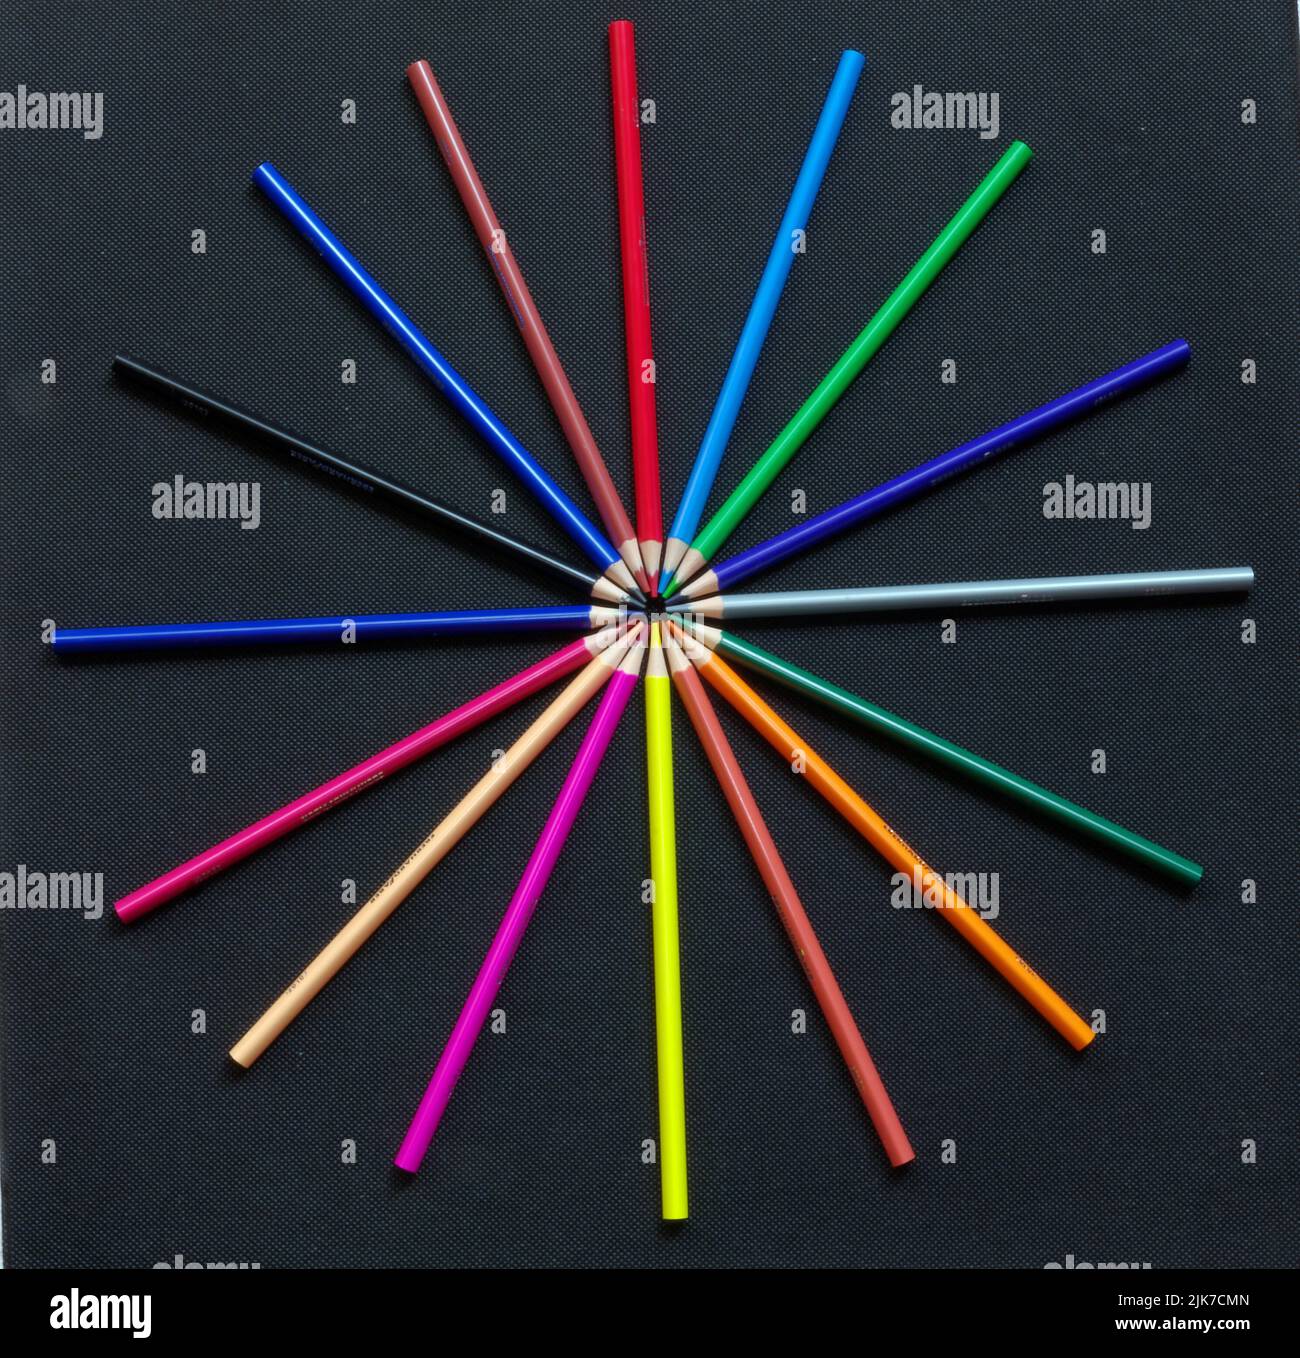 Painting and drawing: Various colored pencils on black background, arranged in a circle Stock Photo